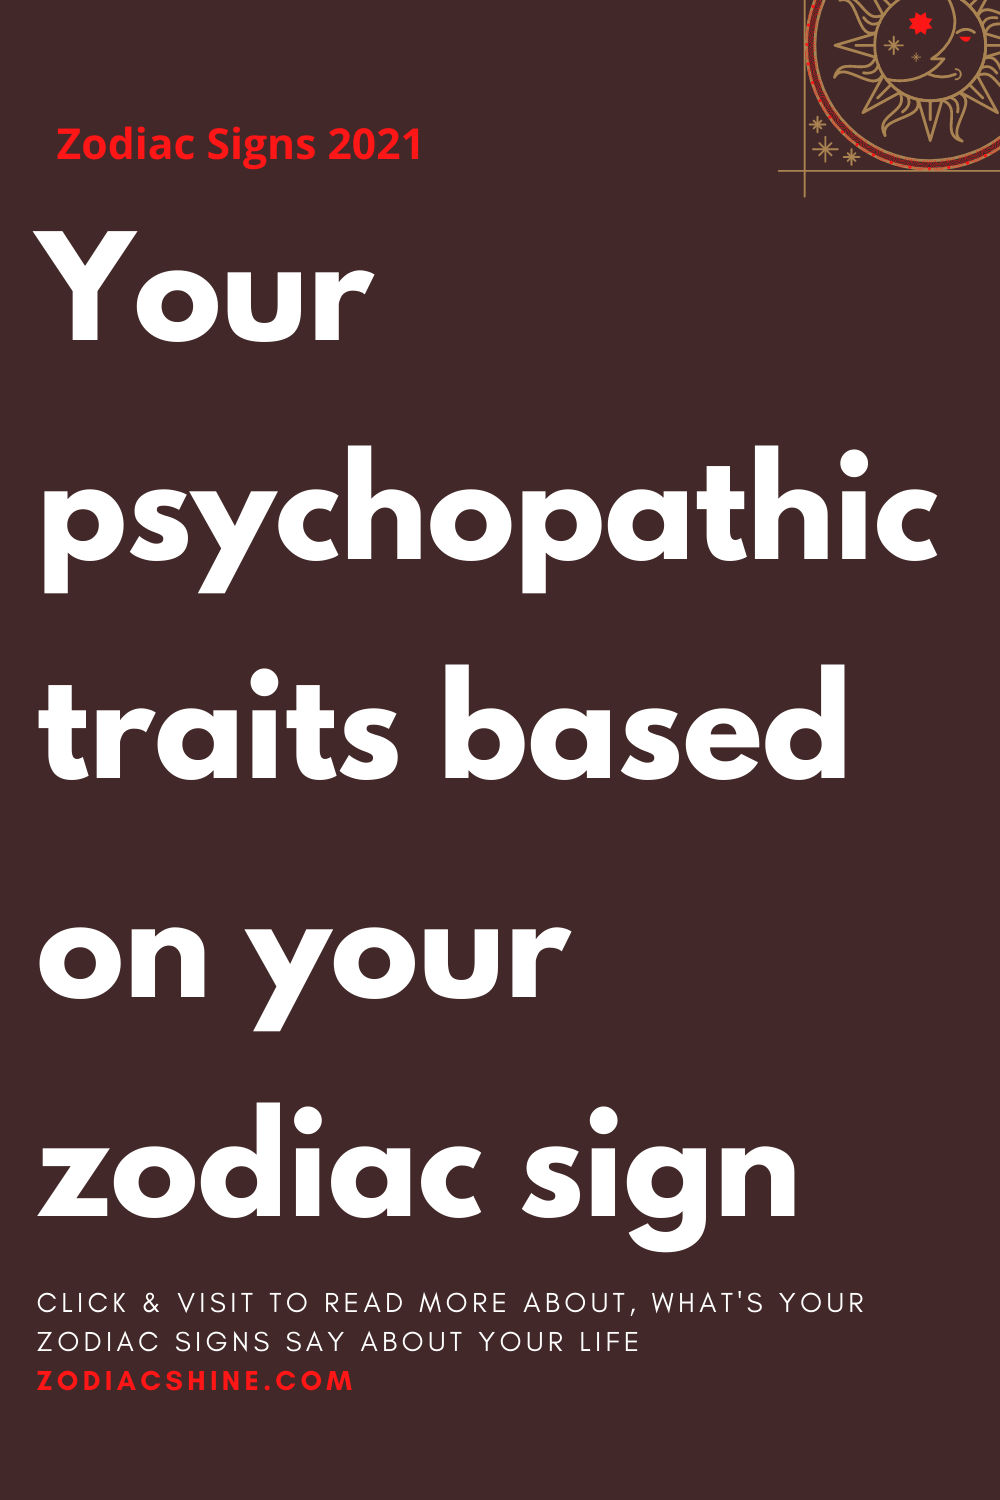 Your psychopathic traits based on your zodiac sign